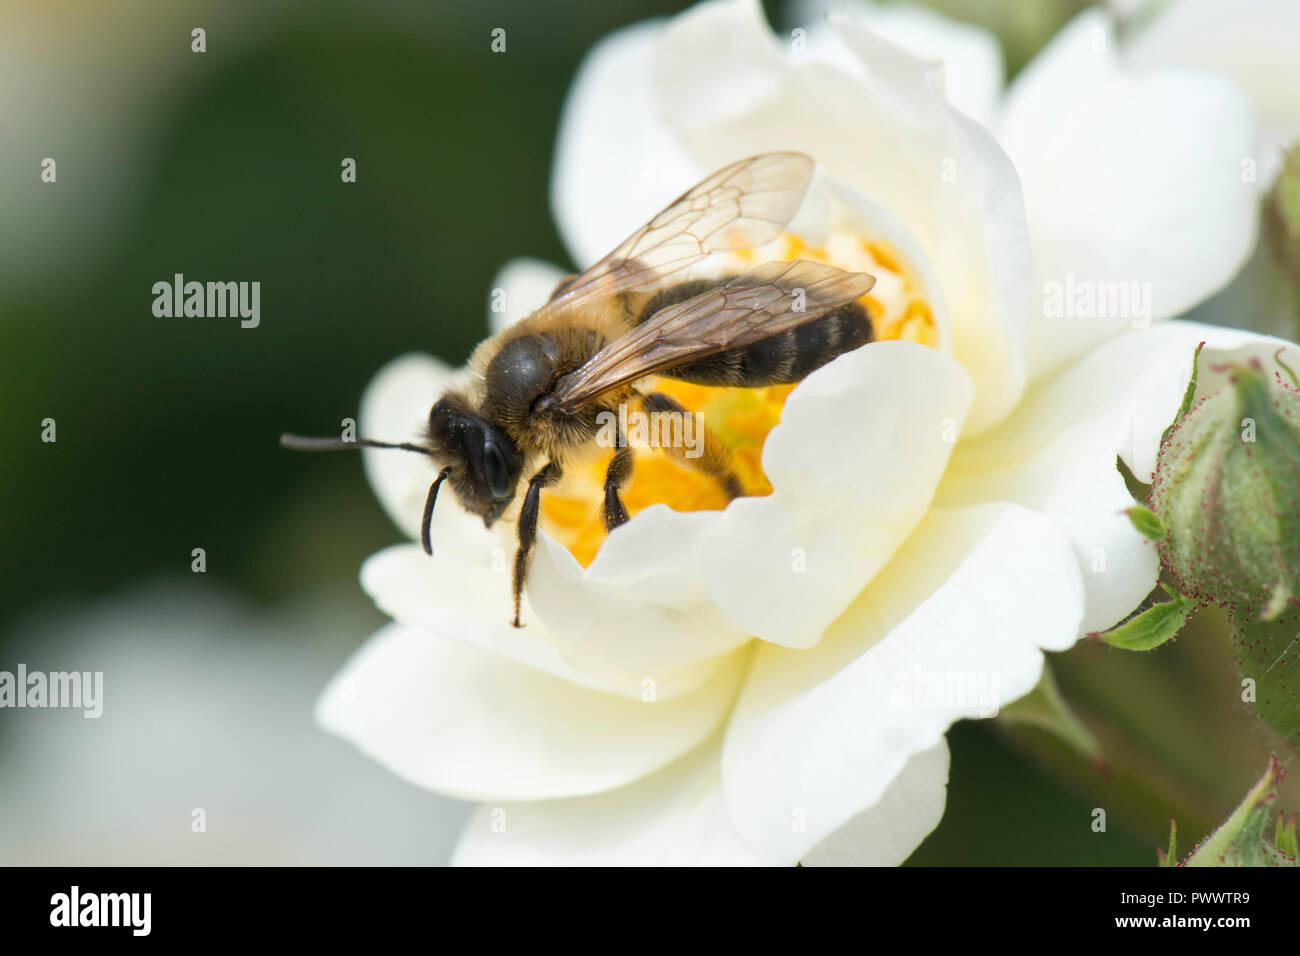 A female orange-tailed mining bee, Andrena haemorrhoa, landing on the white flower of a rose 'Rambling Rector', a summer pollinator, June Stock Photo